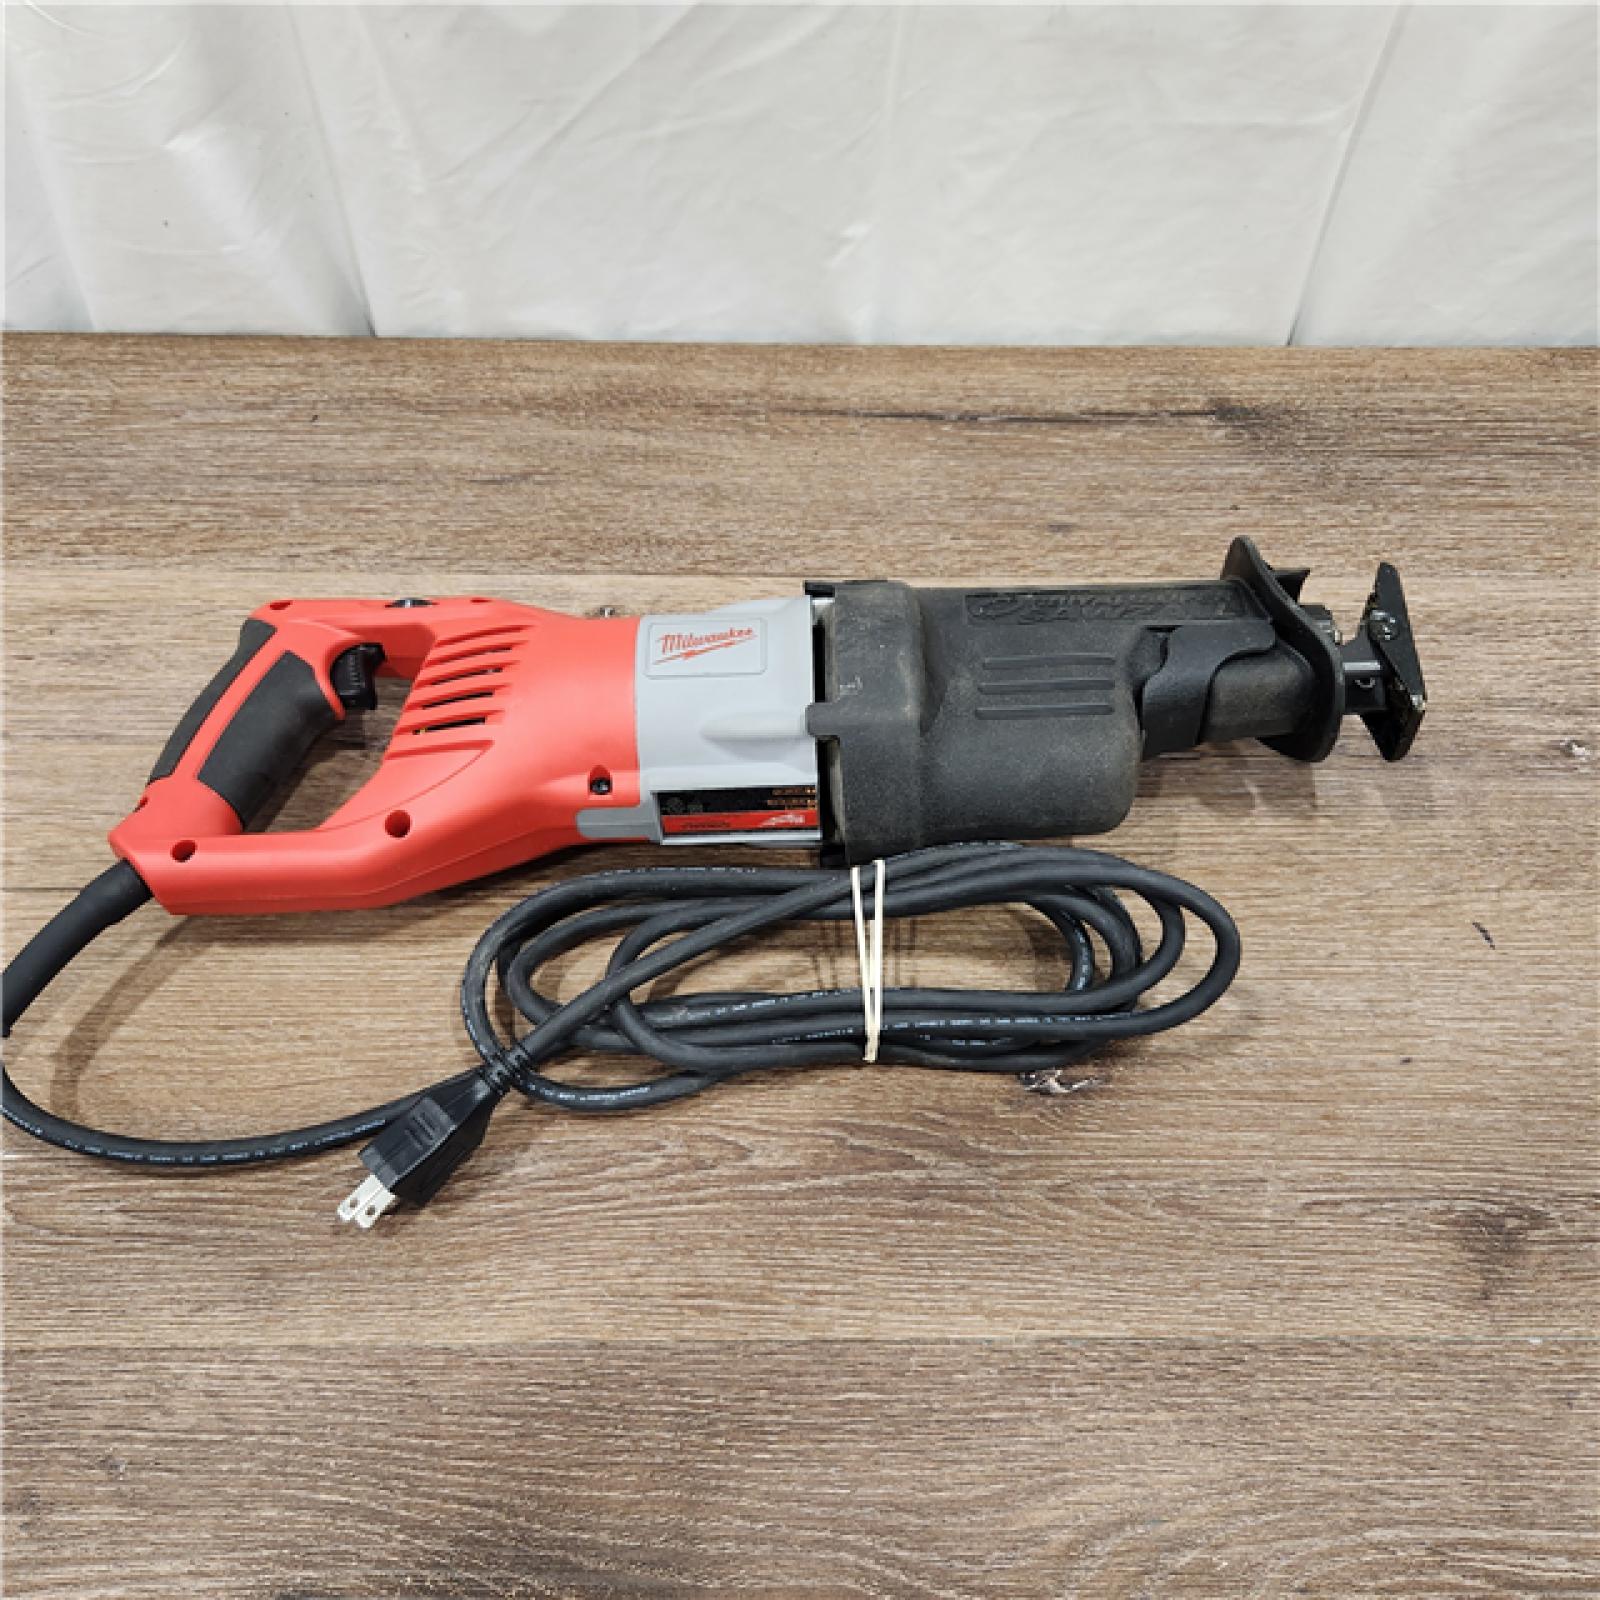 AS-IS 15 Amp 1-1/4 in. Stroke Orbital SUPER SAWZALL Reciprocating Saw with Hard Case